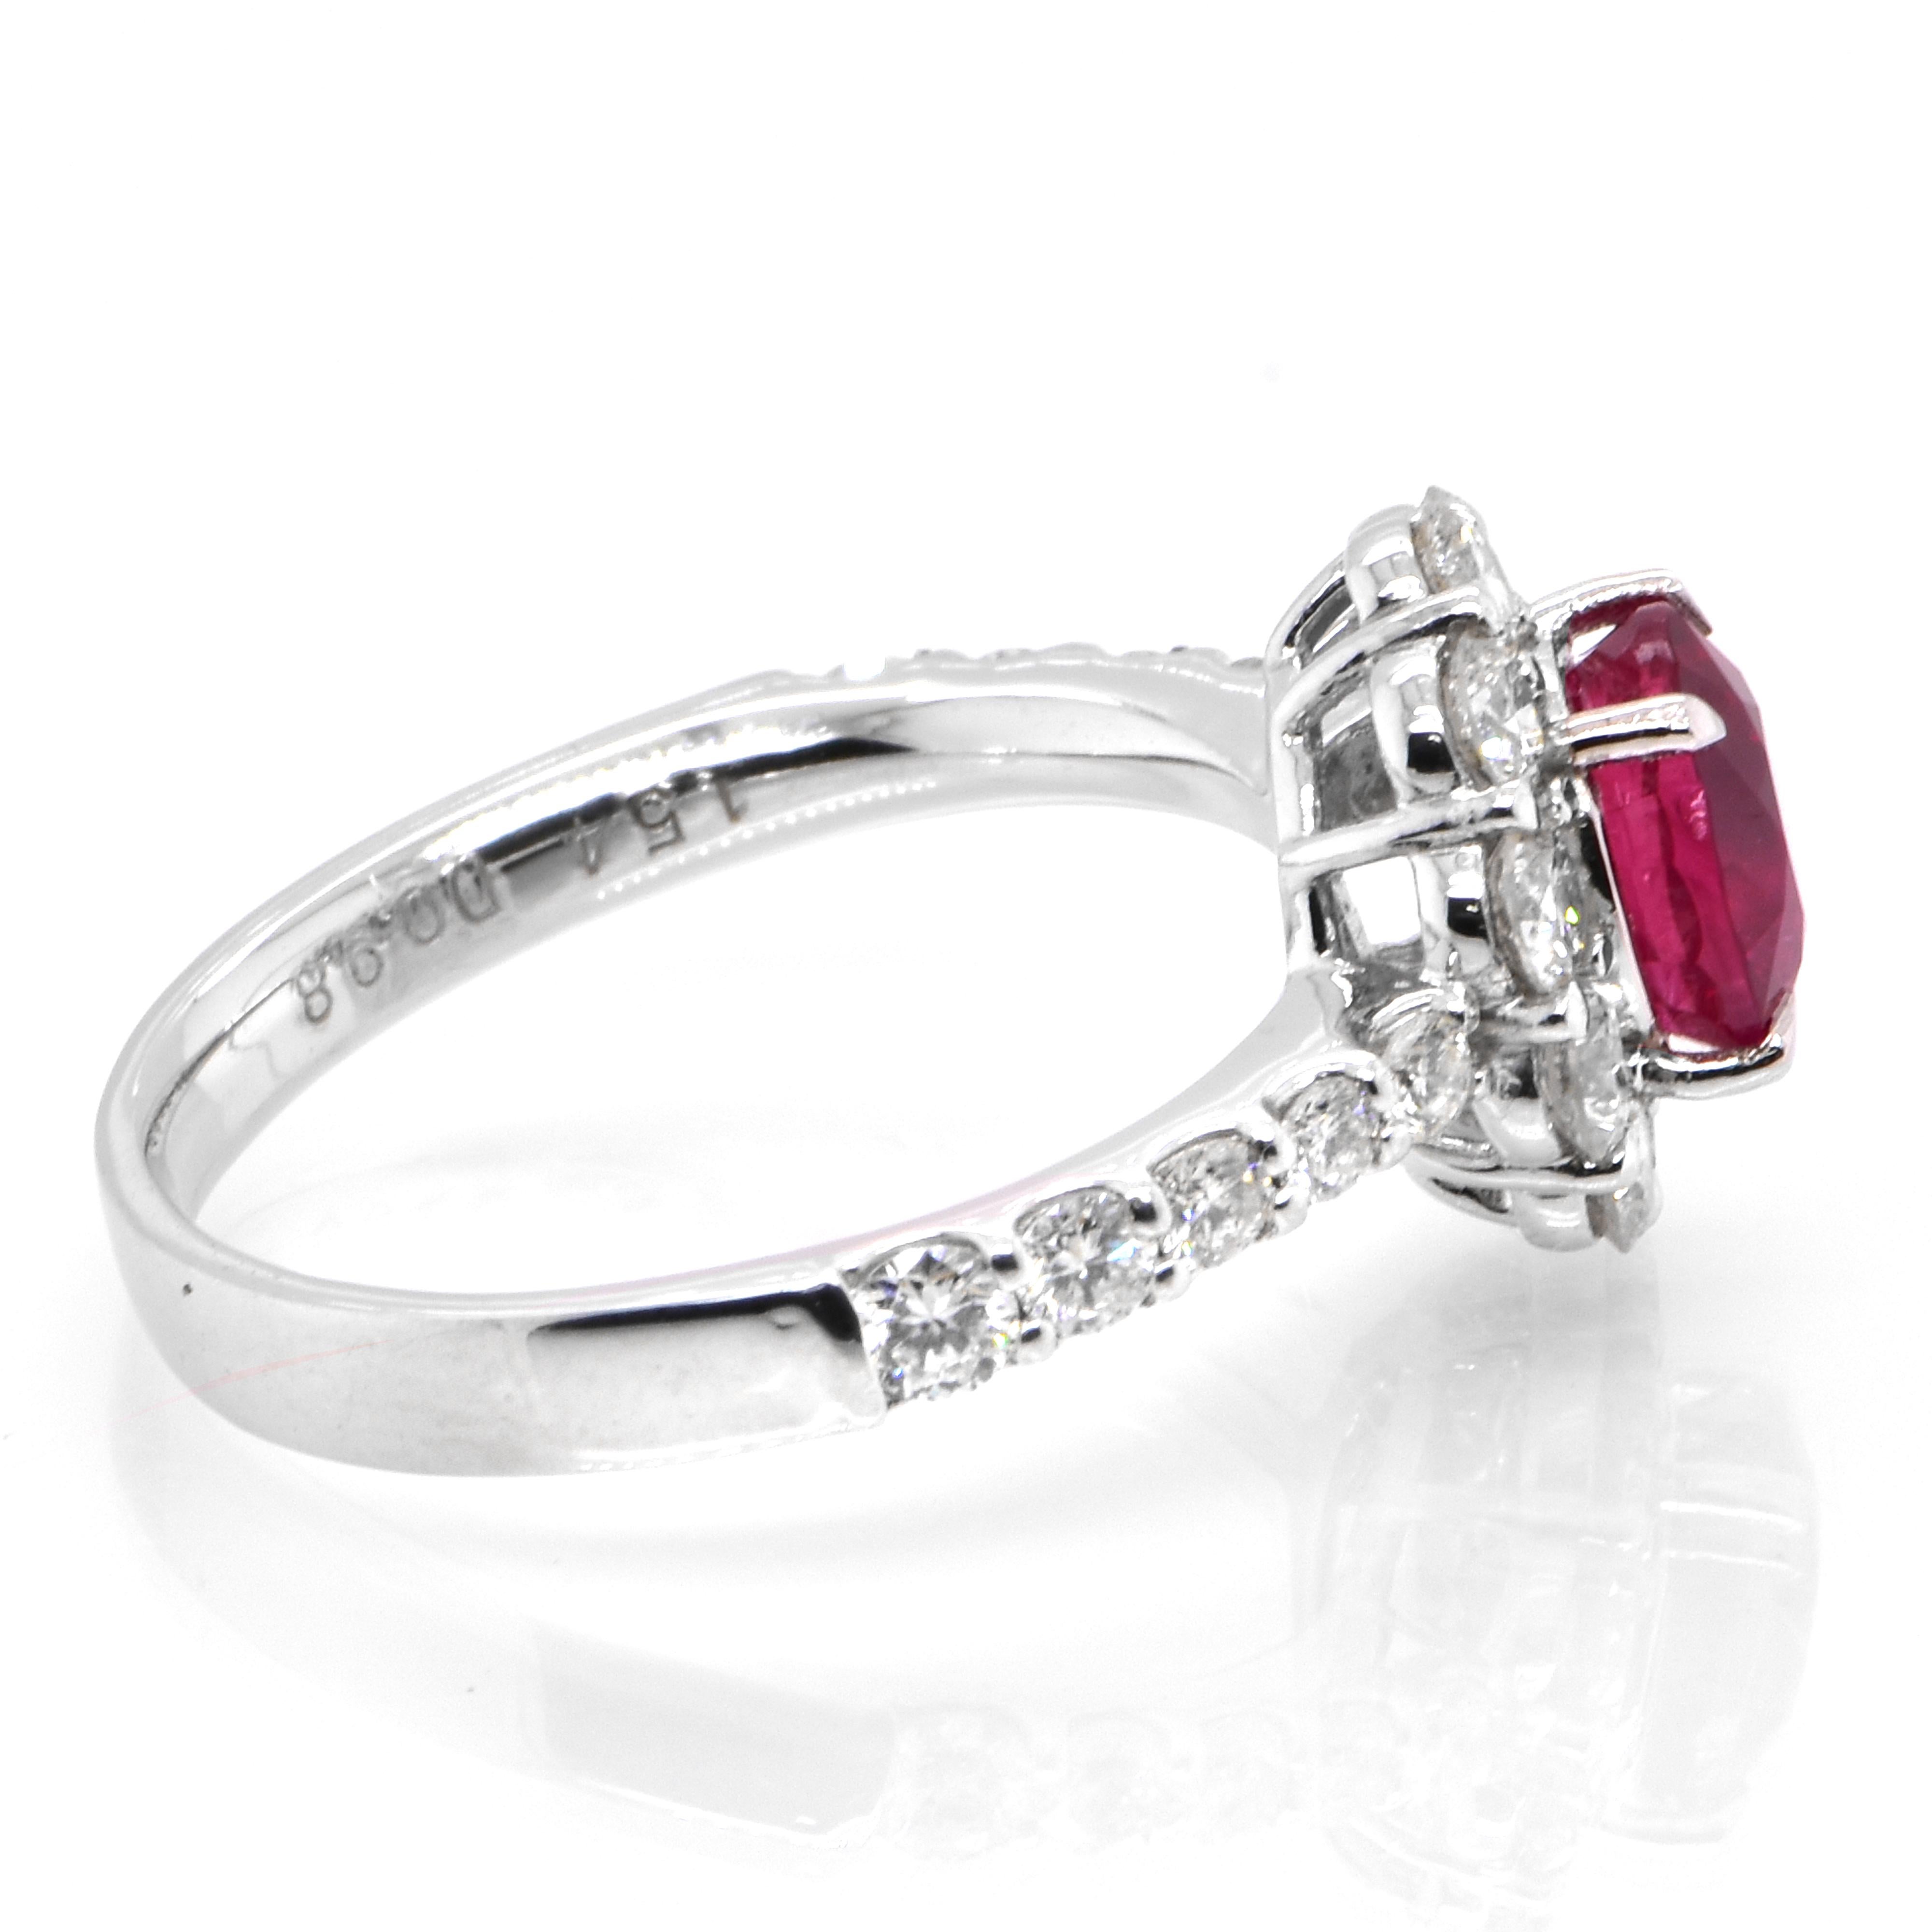 Modern GIA Certified 1.54 Carat Untreated (No Heat) Ruby & Diamond Ring Set in Platinum For Sale